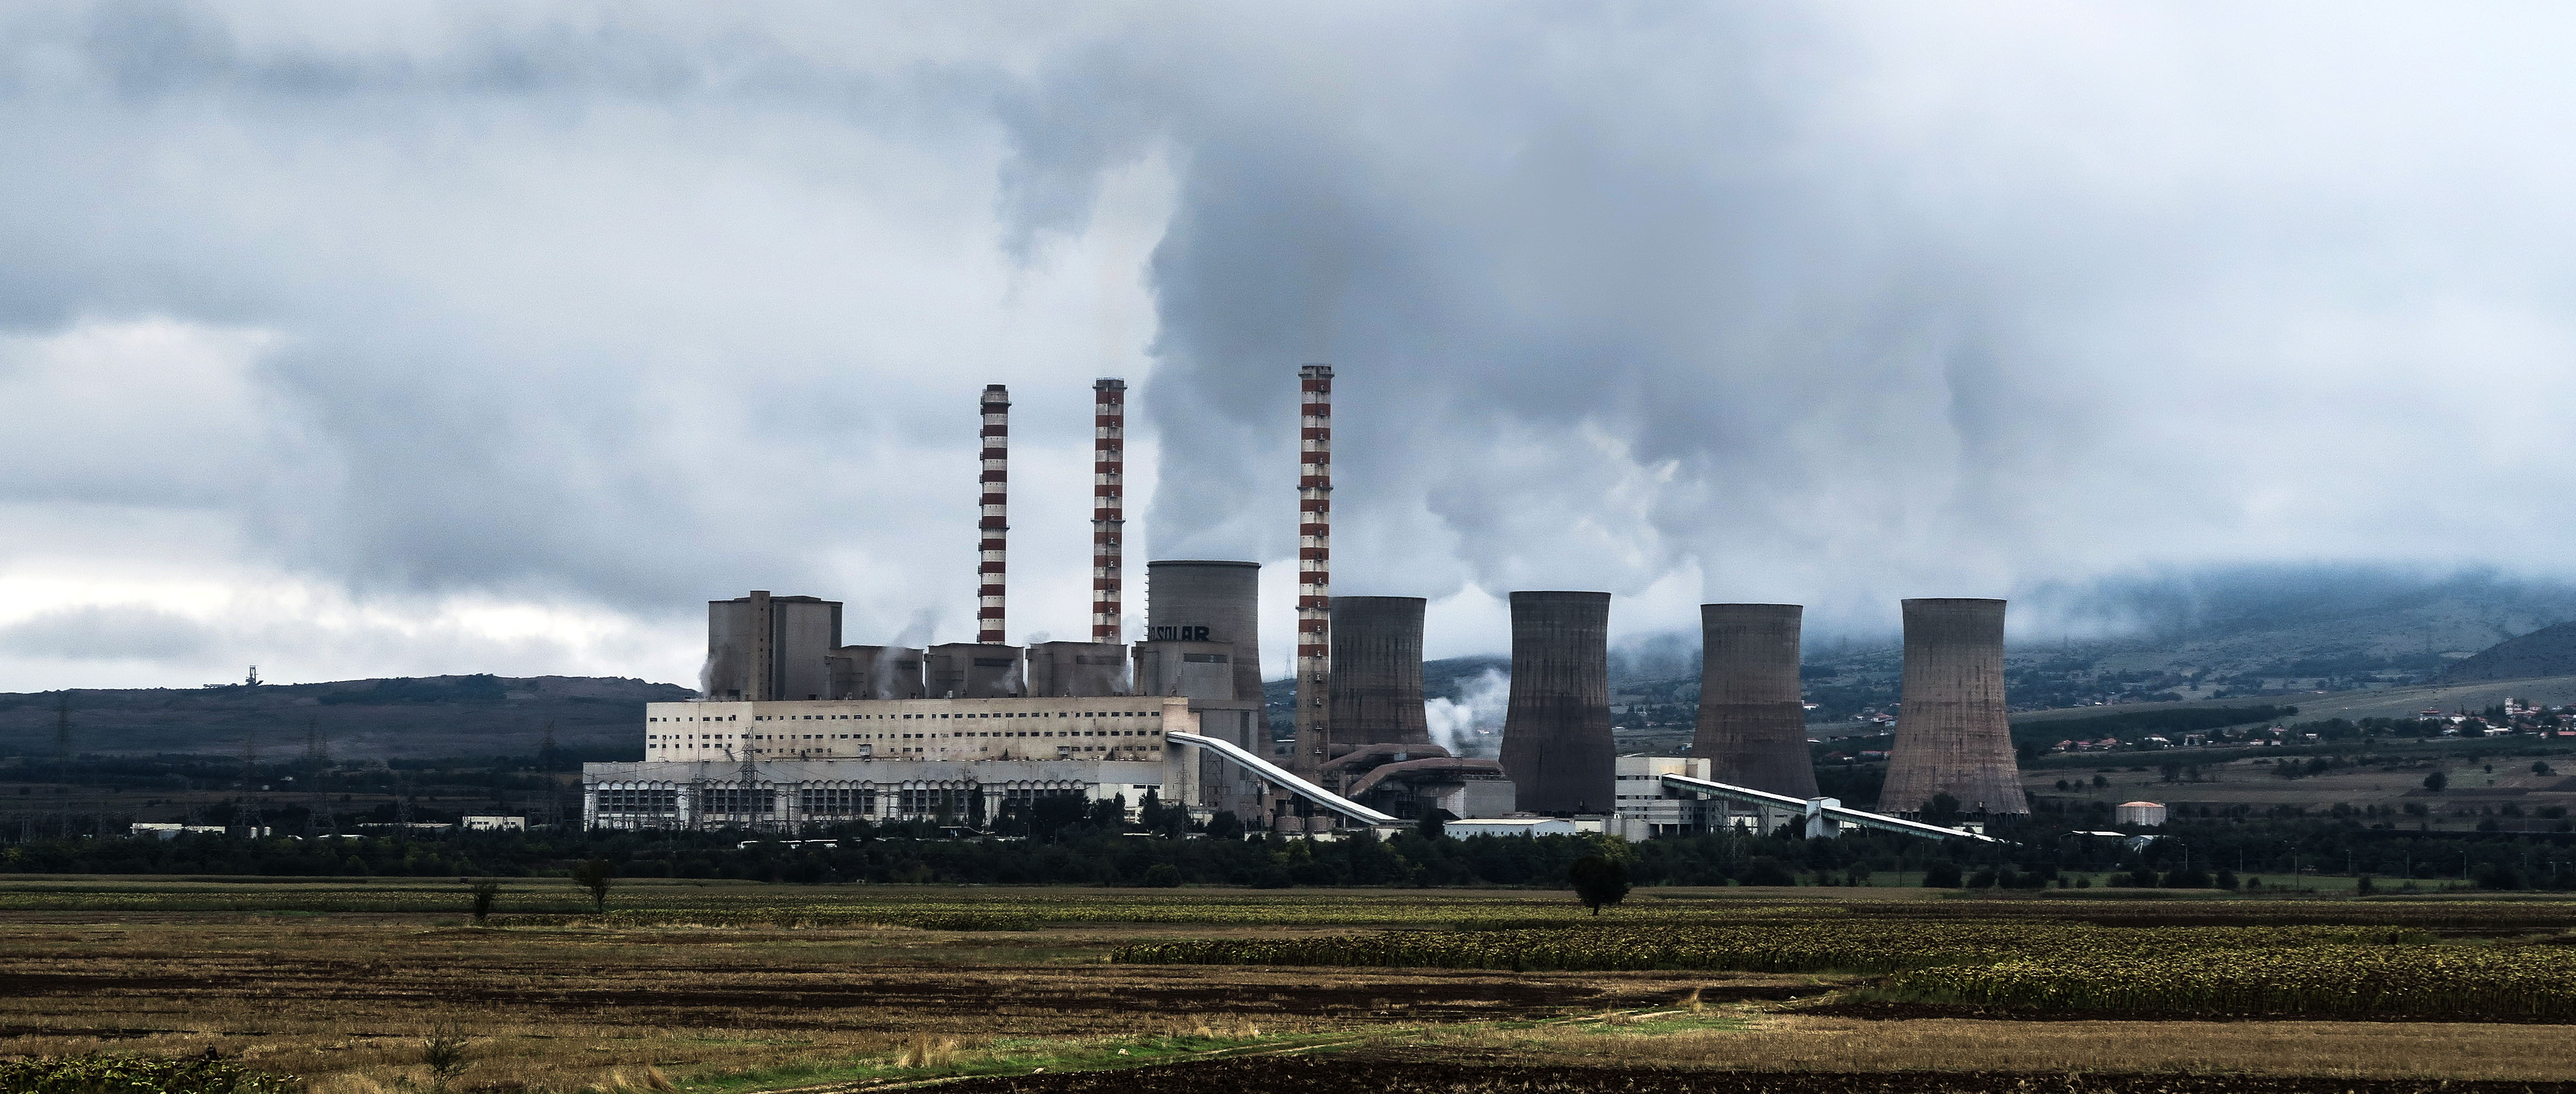 Bailing out dirty power plants isn't good for our health or our pocketbooks.